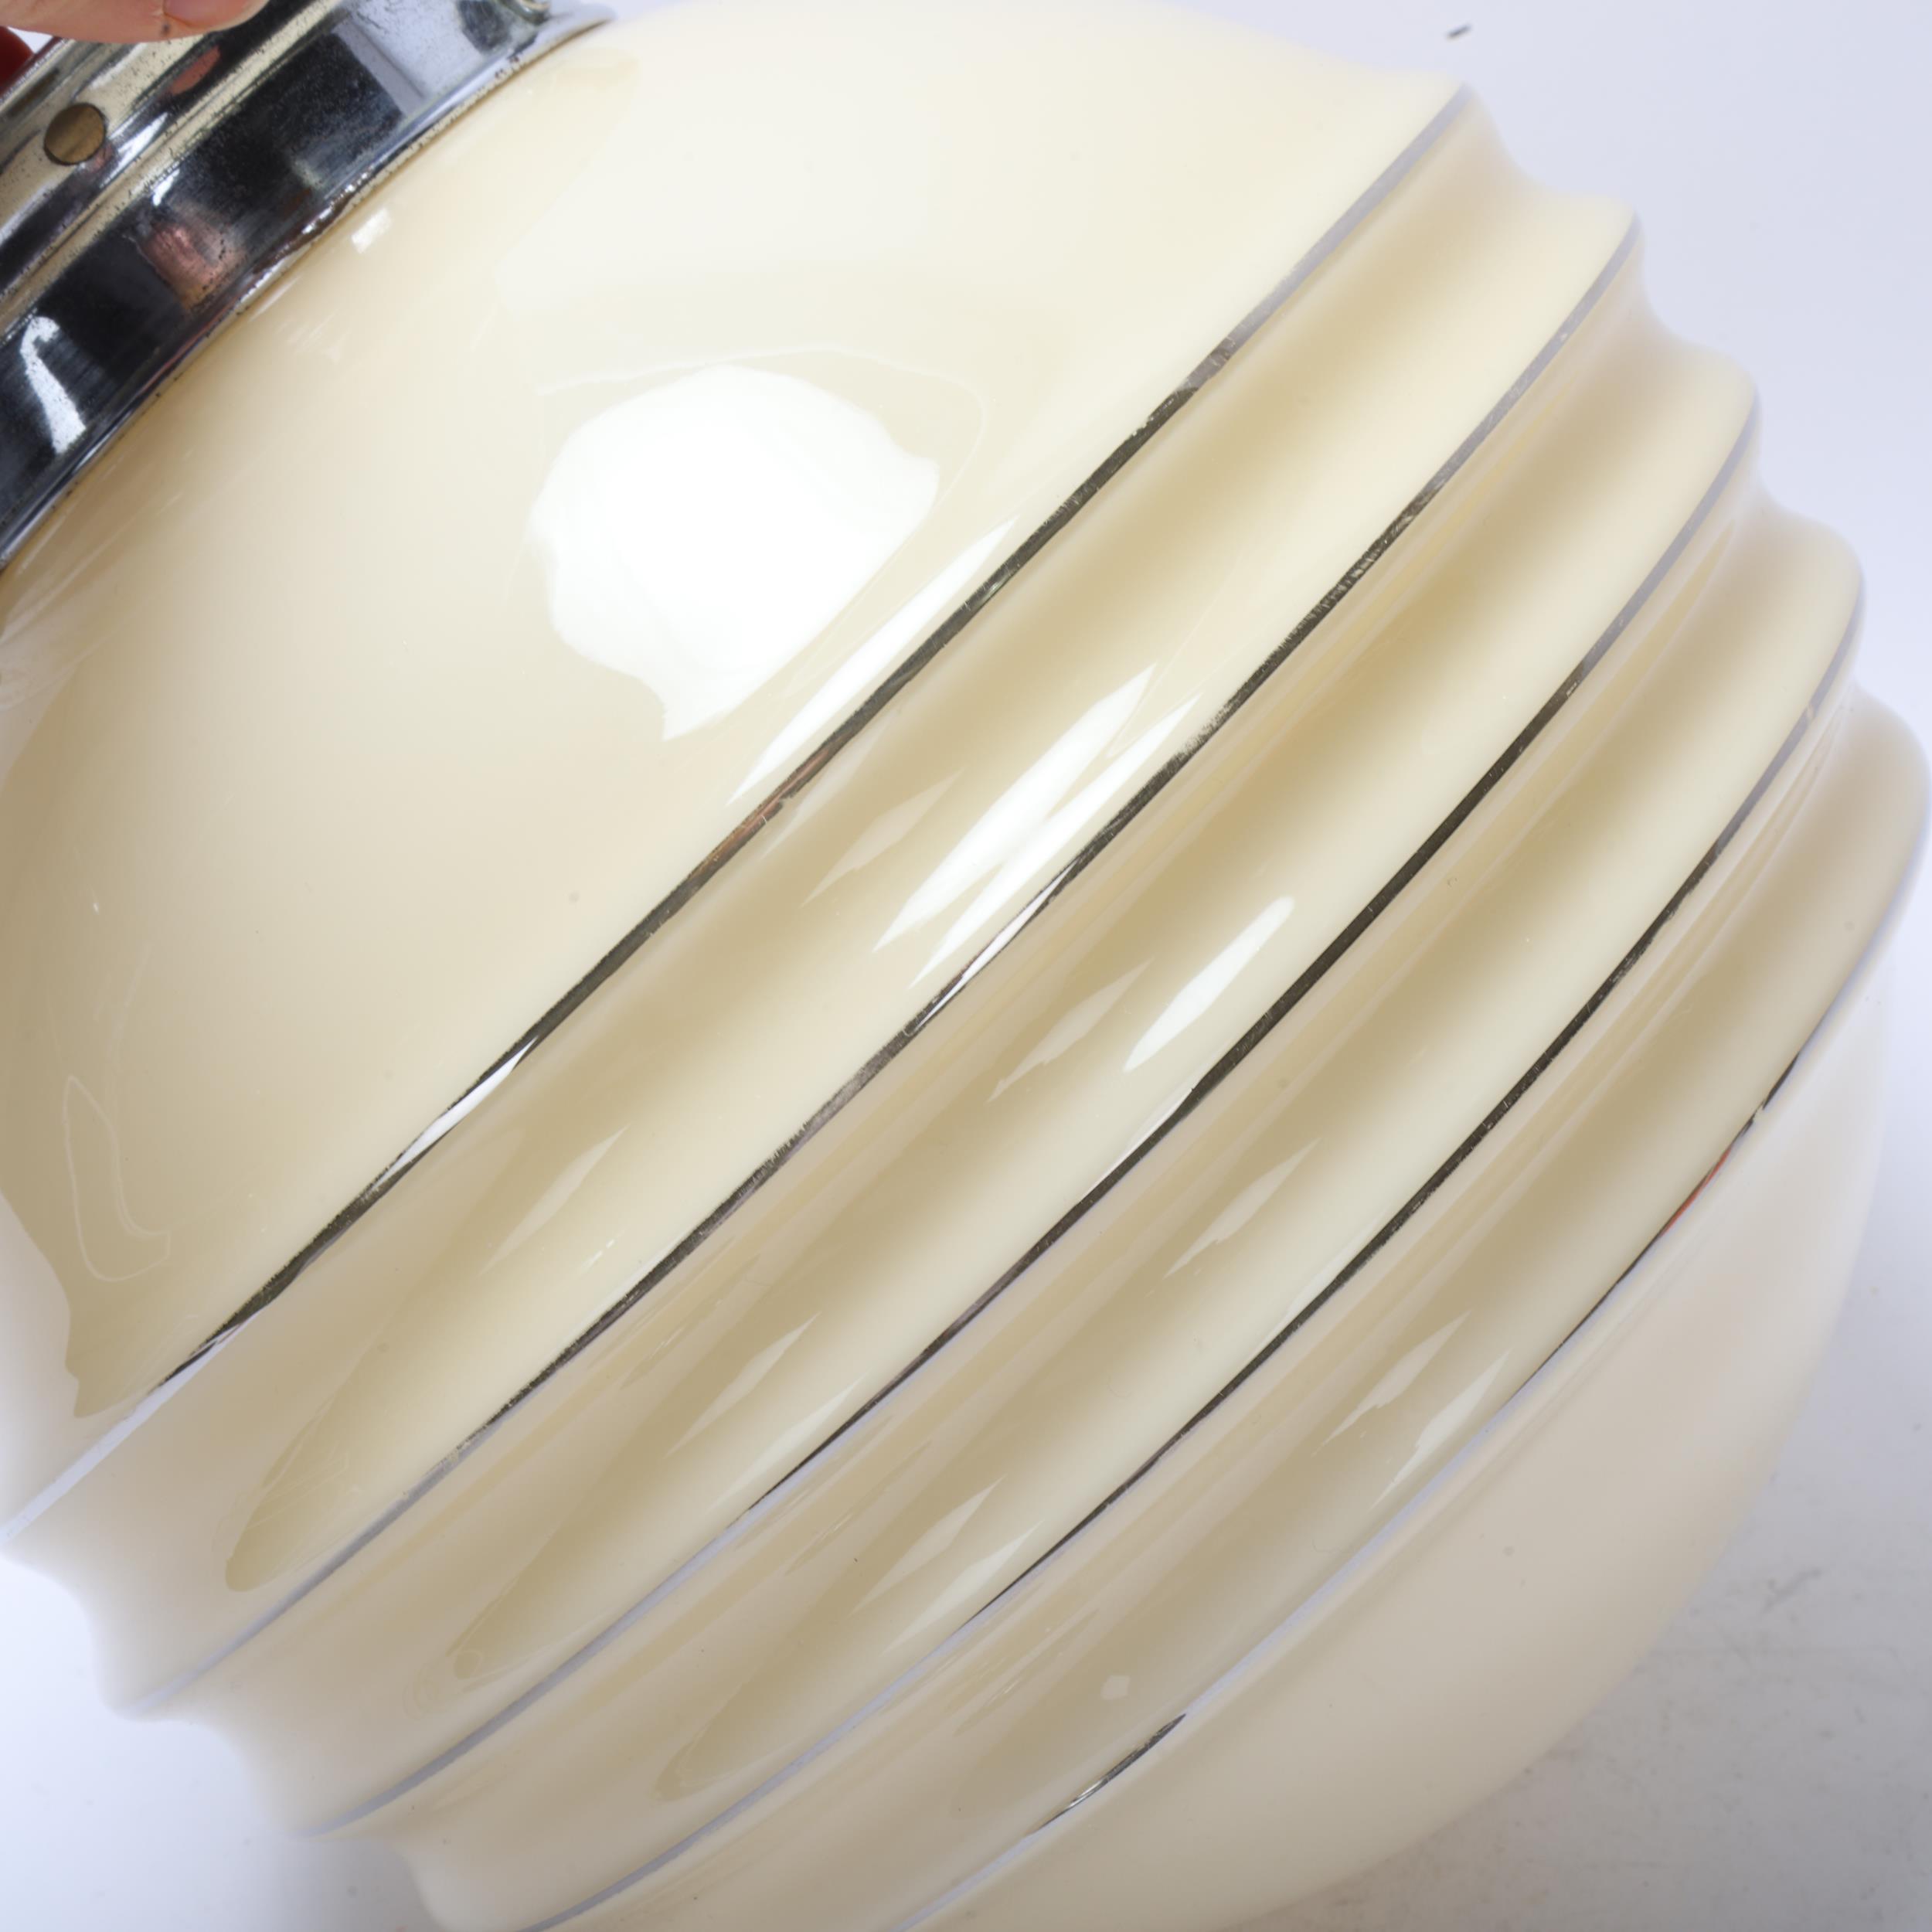 Art Deco globular ceiling light fitting, with silver lined opaque glass shade and chrome fitting, - Image 3 of 3